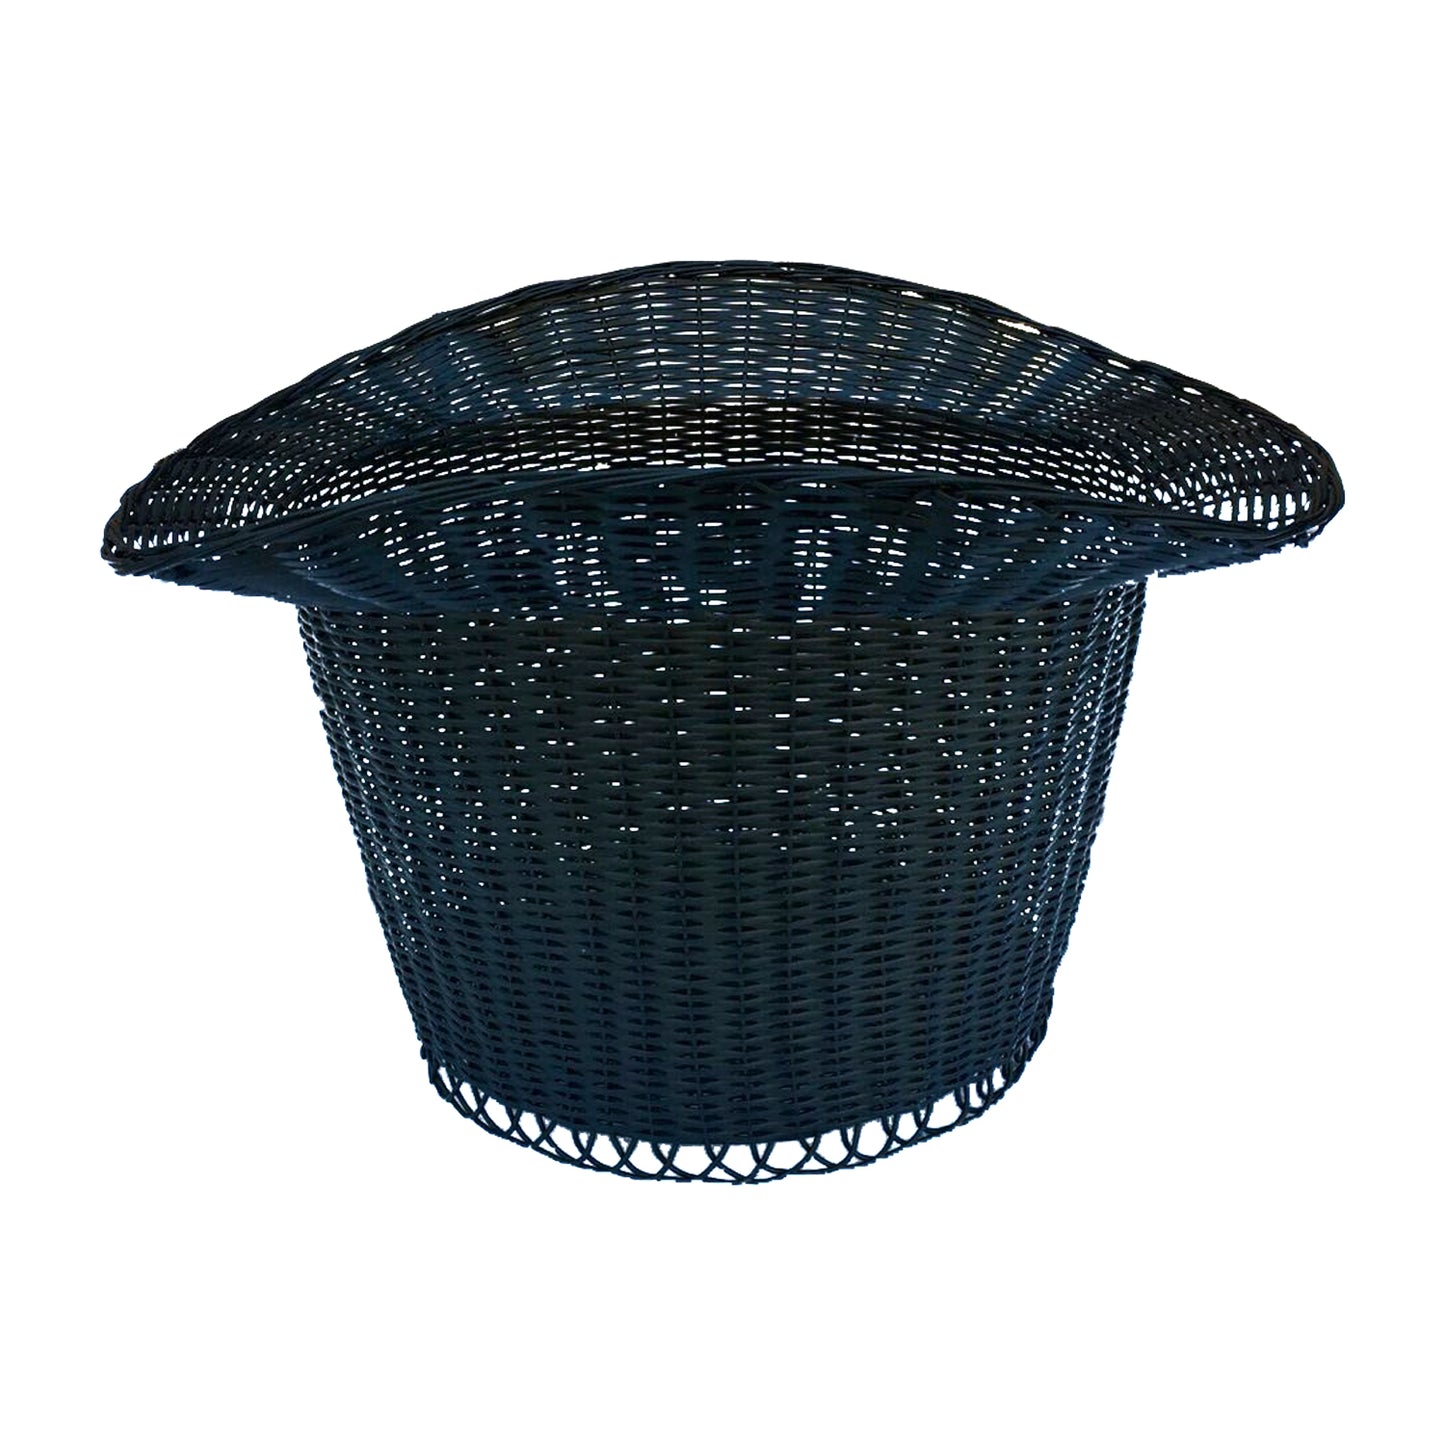 GiftBay Metal Wire Basket Set of 2 Pieces, 8.5" high